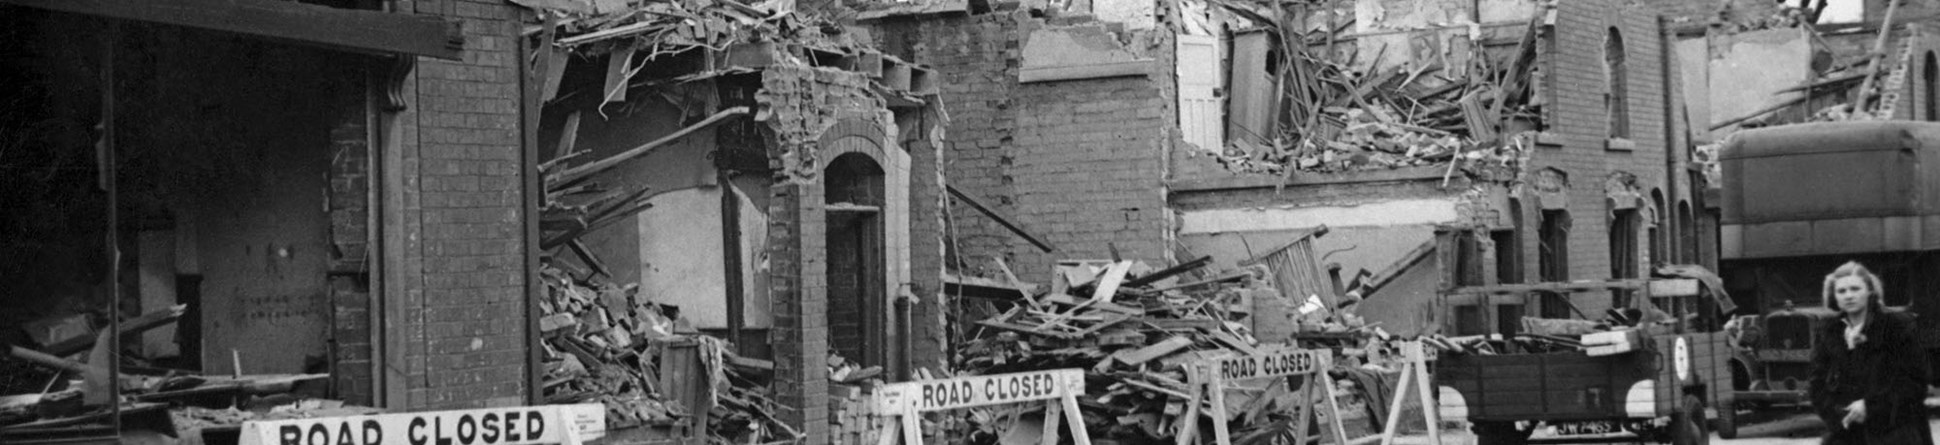 In front of the damaged houses are 'road closed' signs and a woman walking along in the road.